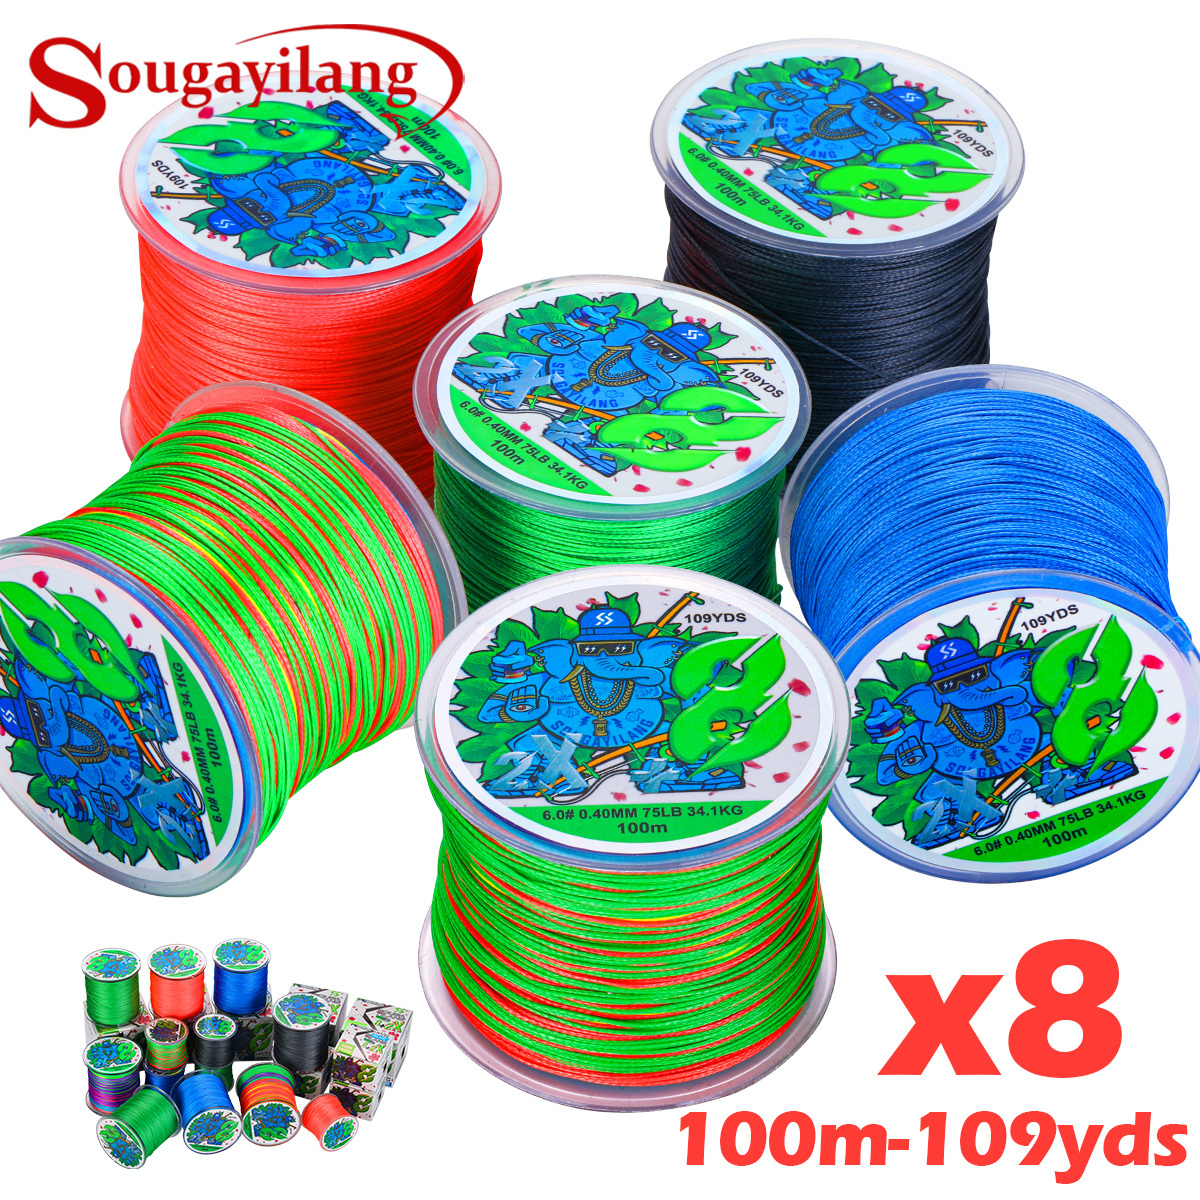 Sougayilang 9 Strands Fishing Line 500m Braided Fishing Line, Free  Shipping For New Users